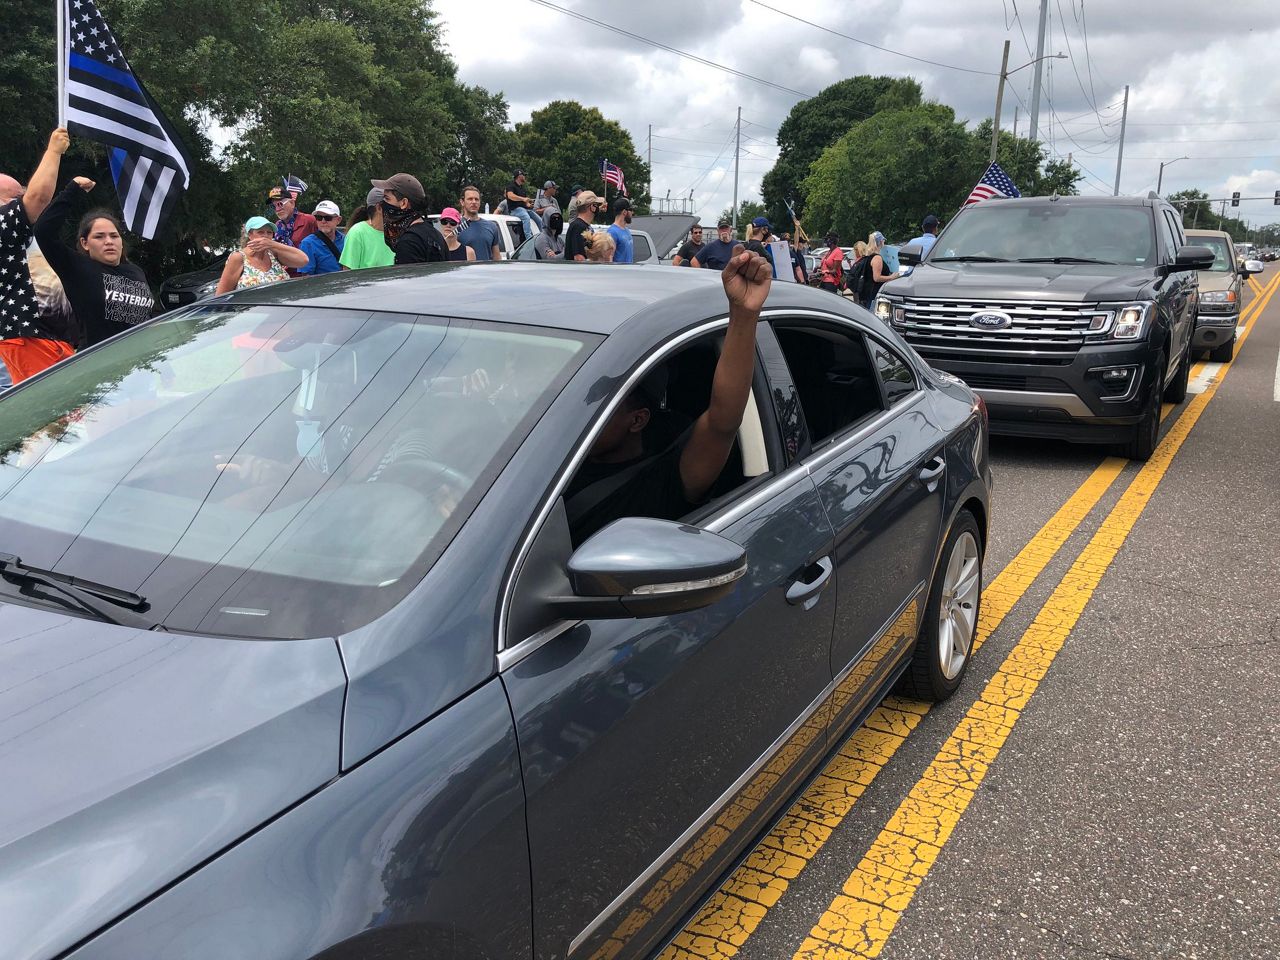 Drivers in their cars show support for Black Lives Matter as they drive past a "Back the Blue" rally in Tampa, Saturday, June 13, 2020. (Ashley Paul/Spectrum Bay News 9)